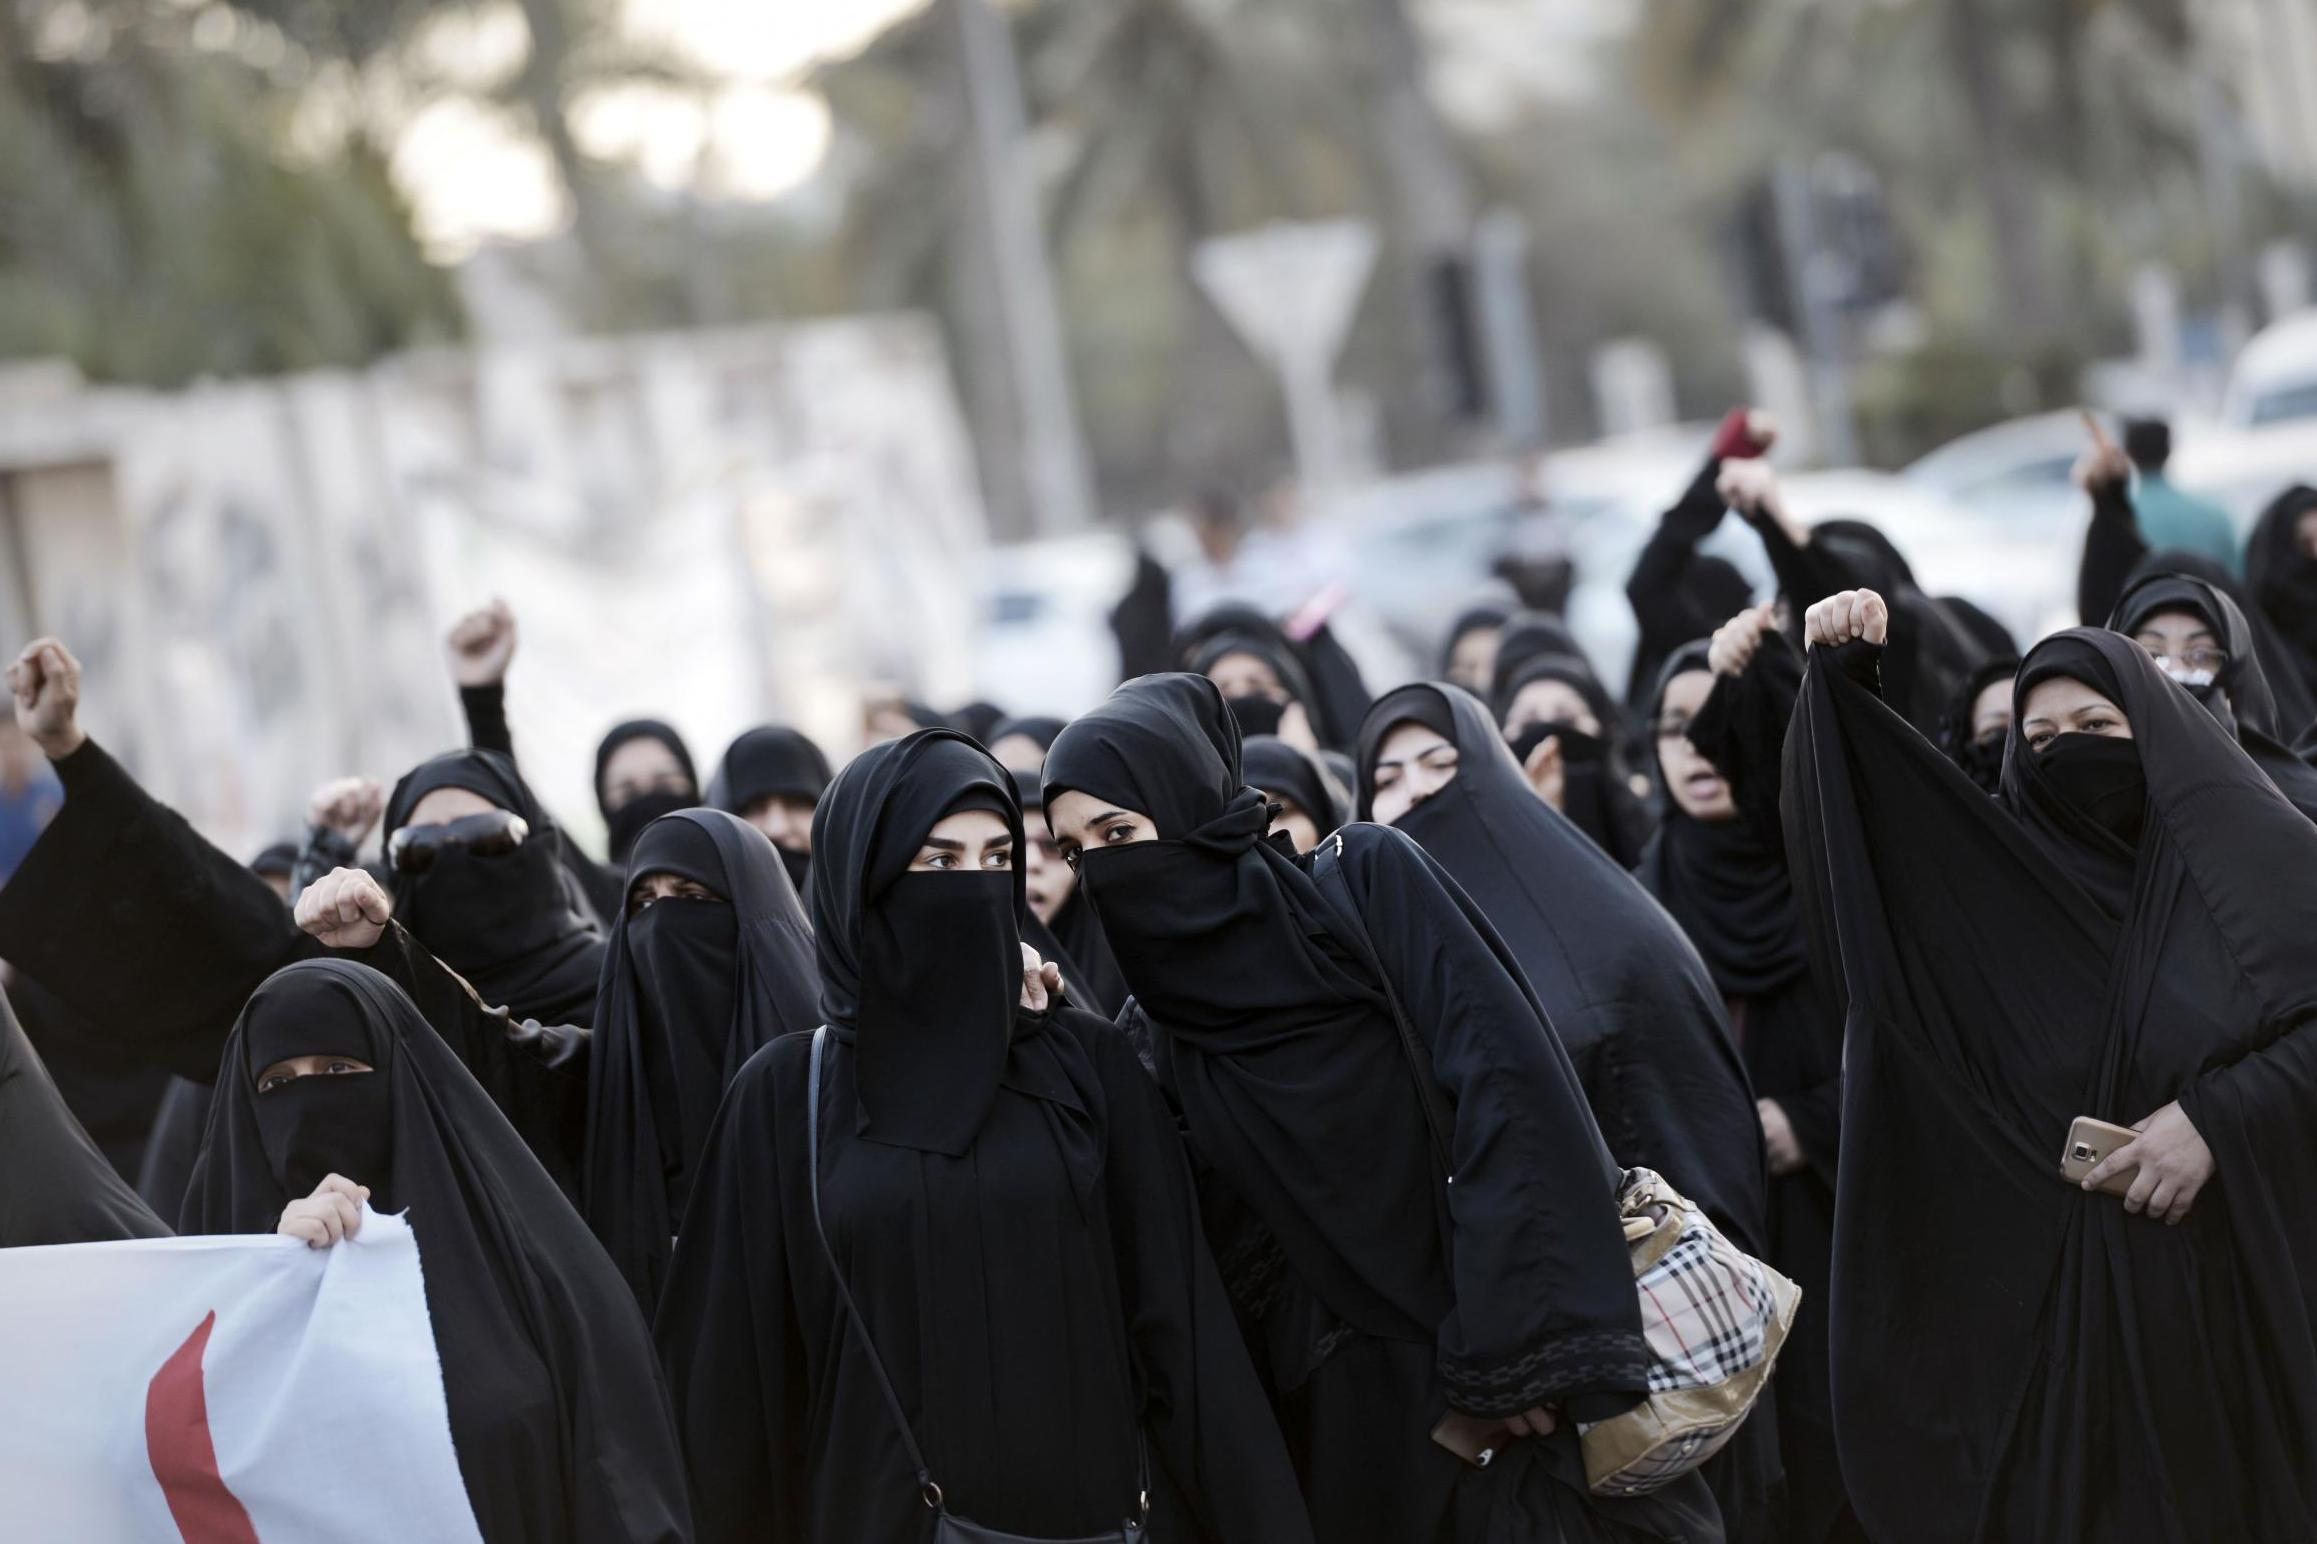 Picture: Bahraini women take part in a protest in the village of Jidhafs, west of Manama, against the execution of prominent Shiite Muslim cleric Nimr al-Nimr by Saudi authorities, on January 2, 2016